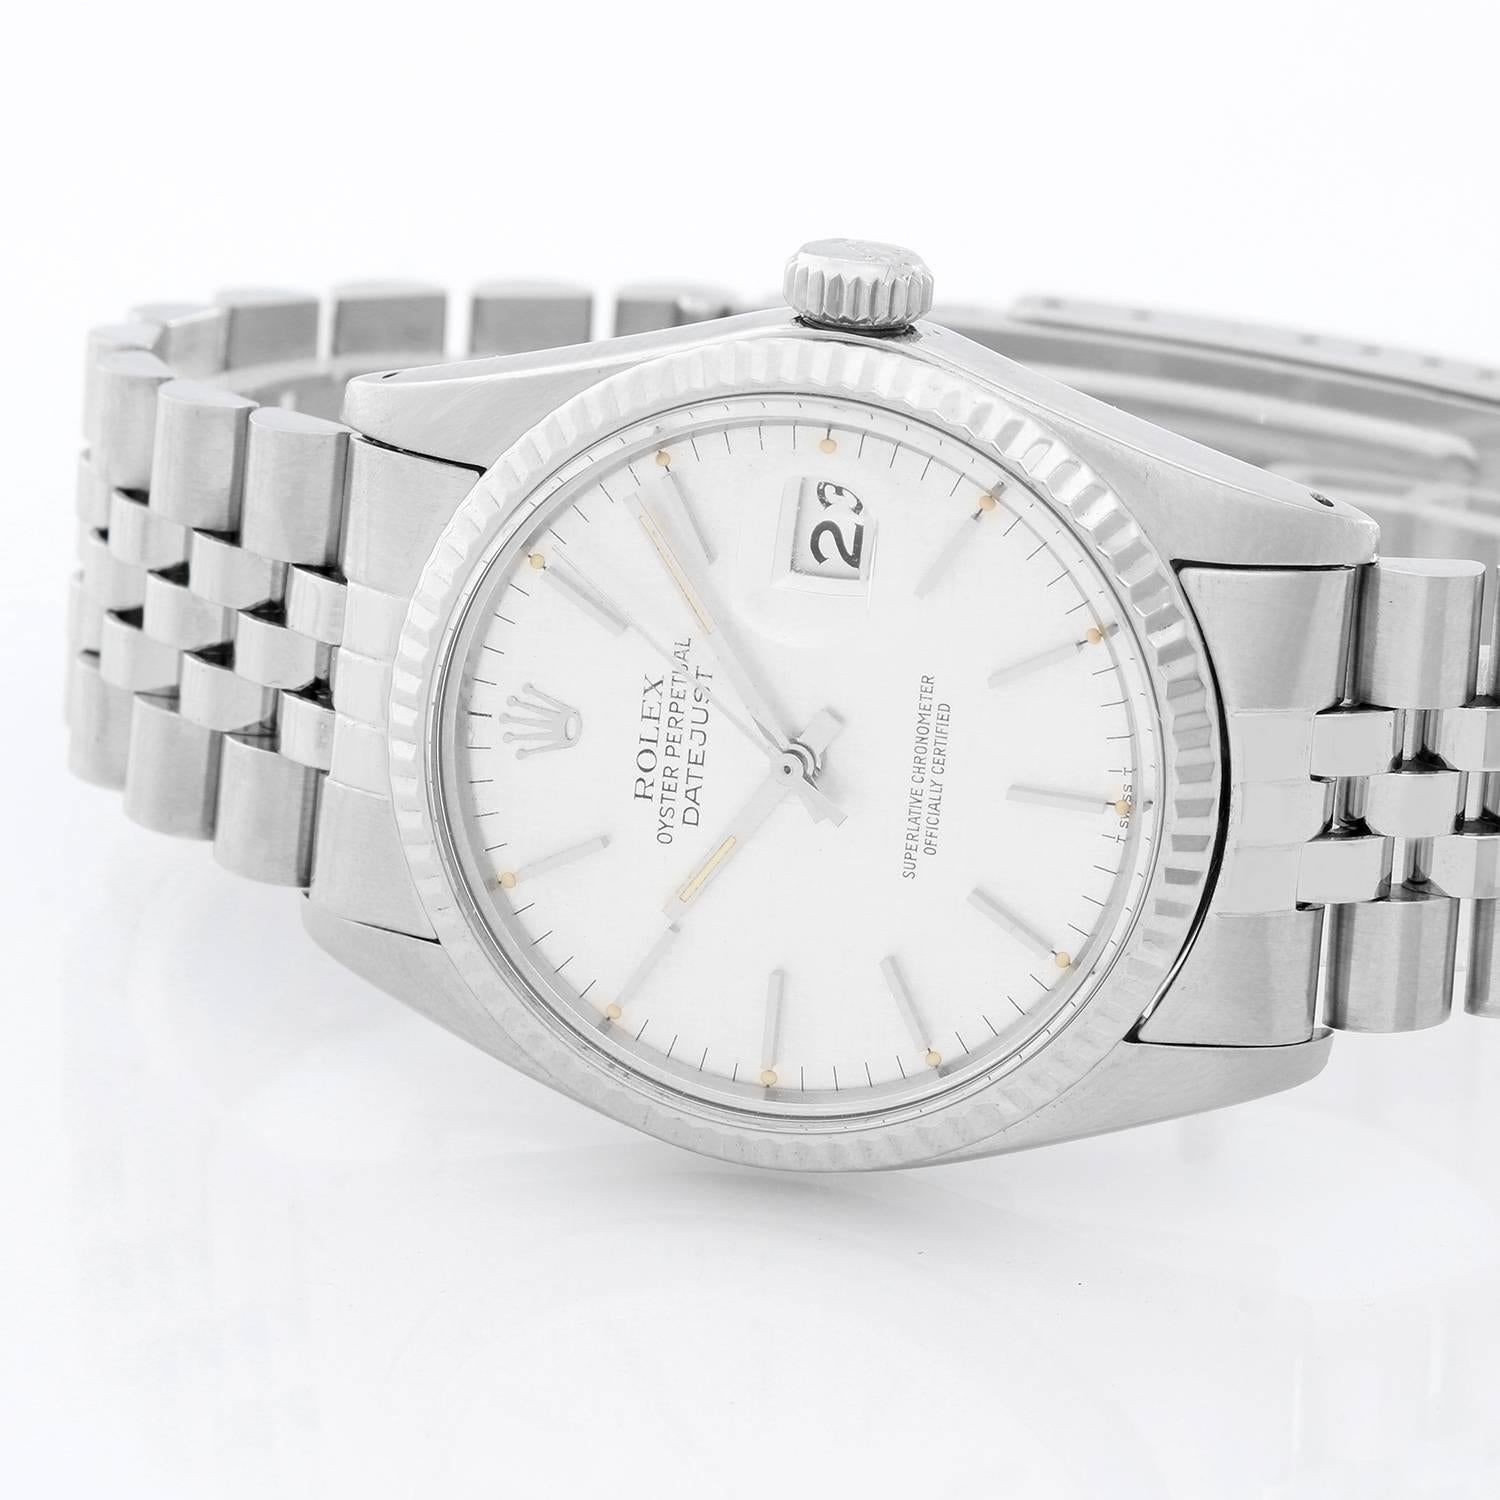 Rolex Datejust Men's Stainless Steel Watch Silvered Dial 16014 - Automatic winding, 27 jewels, Quickset, acrylic crystal. Stainless steel case with white gold Fluted bezel (36mm diameter). Textured Silvered dial . Stainless steel Jubilee bracelet.